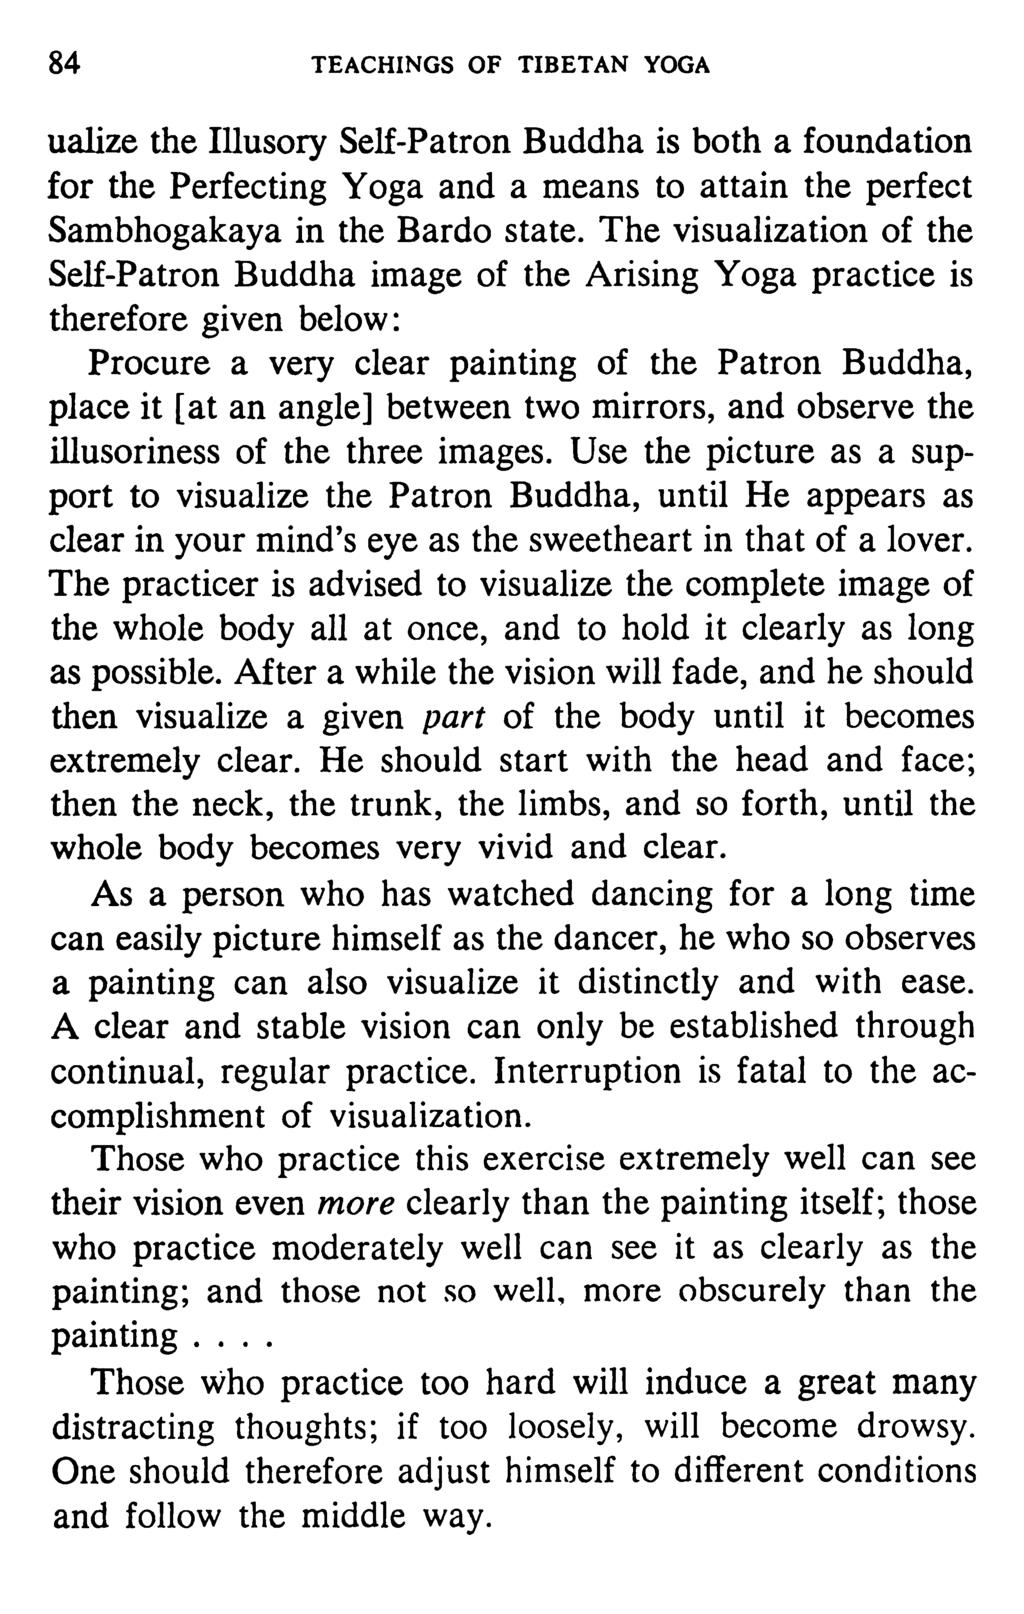 84 TEACHINGS OF TIBETAN YOGA ualize the Illusory Self-Patron Buddha is both a foundation for the Perfecting Yoga and a means to attain the perfect Sambhogakaya in the Bardo state.